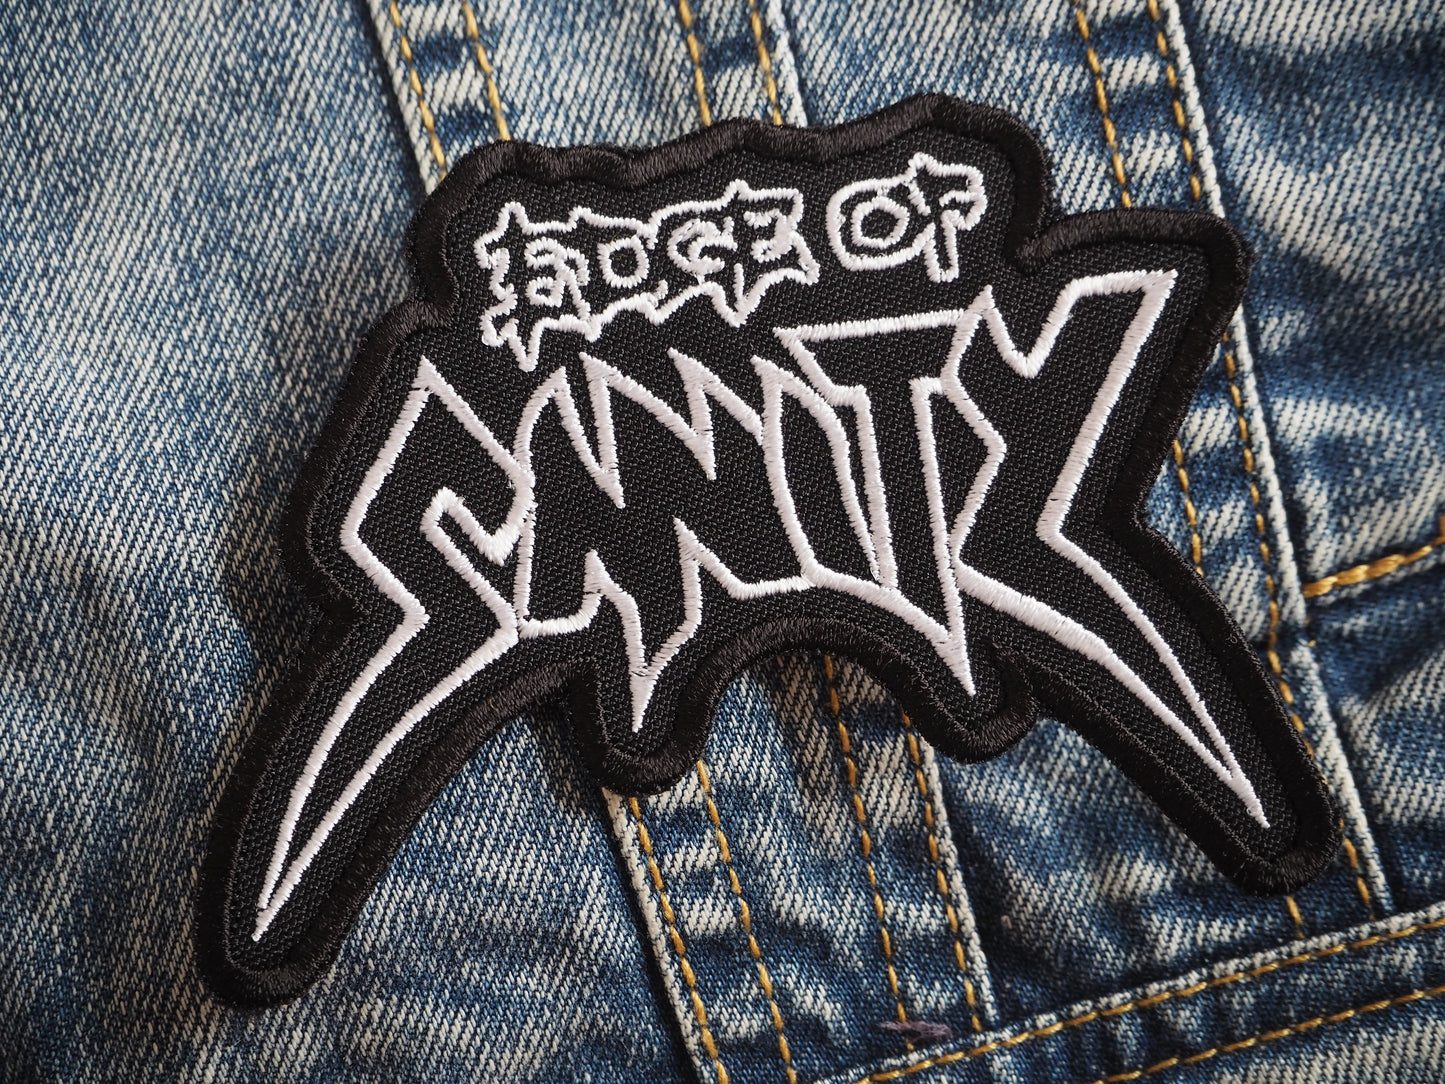 Edge Of Sanity Patch